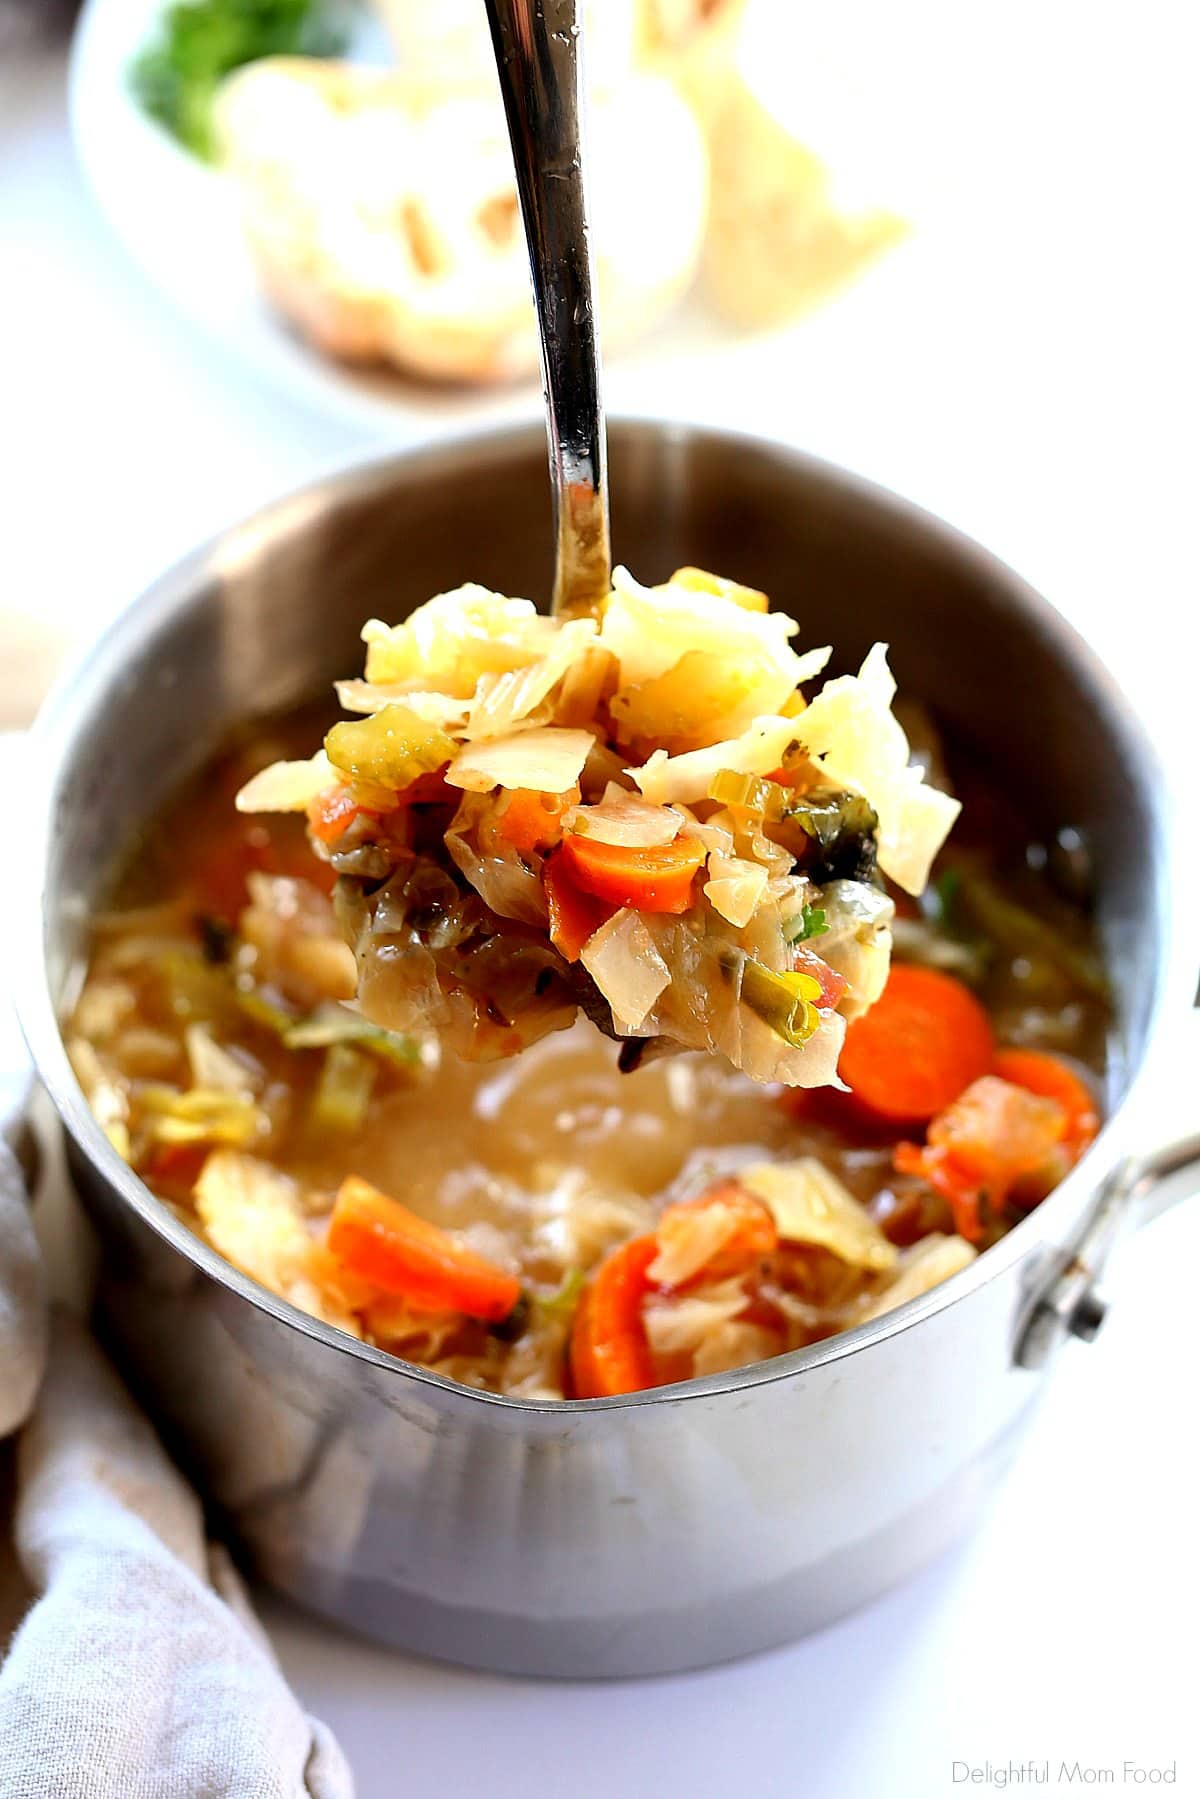 Spoonful of detox cabbage soup in miso broth to support weight loss